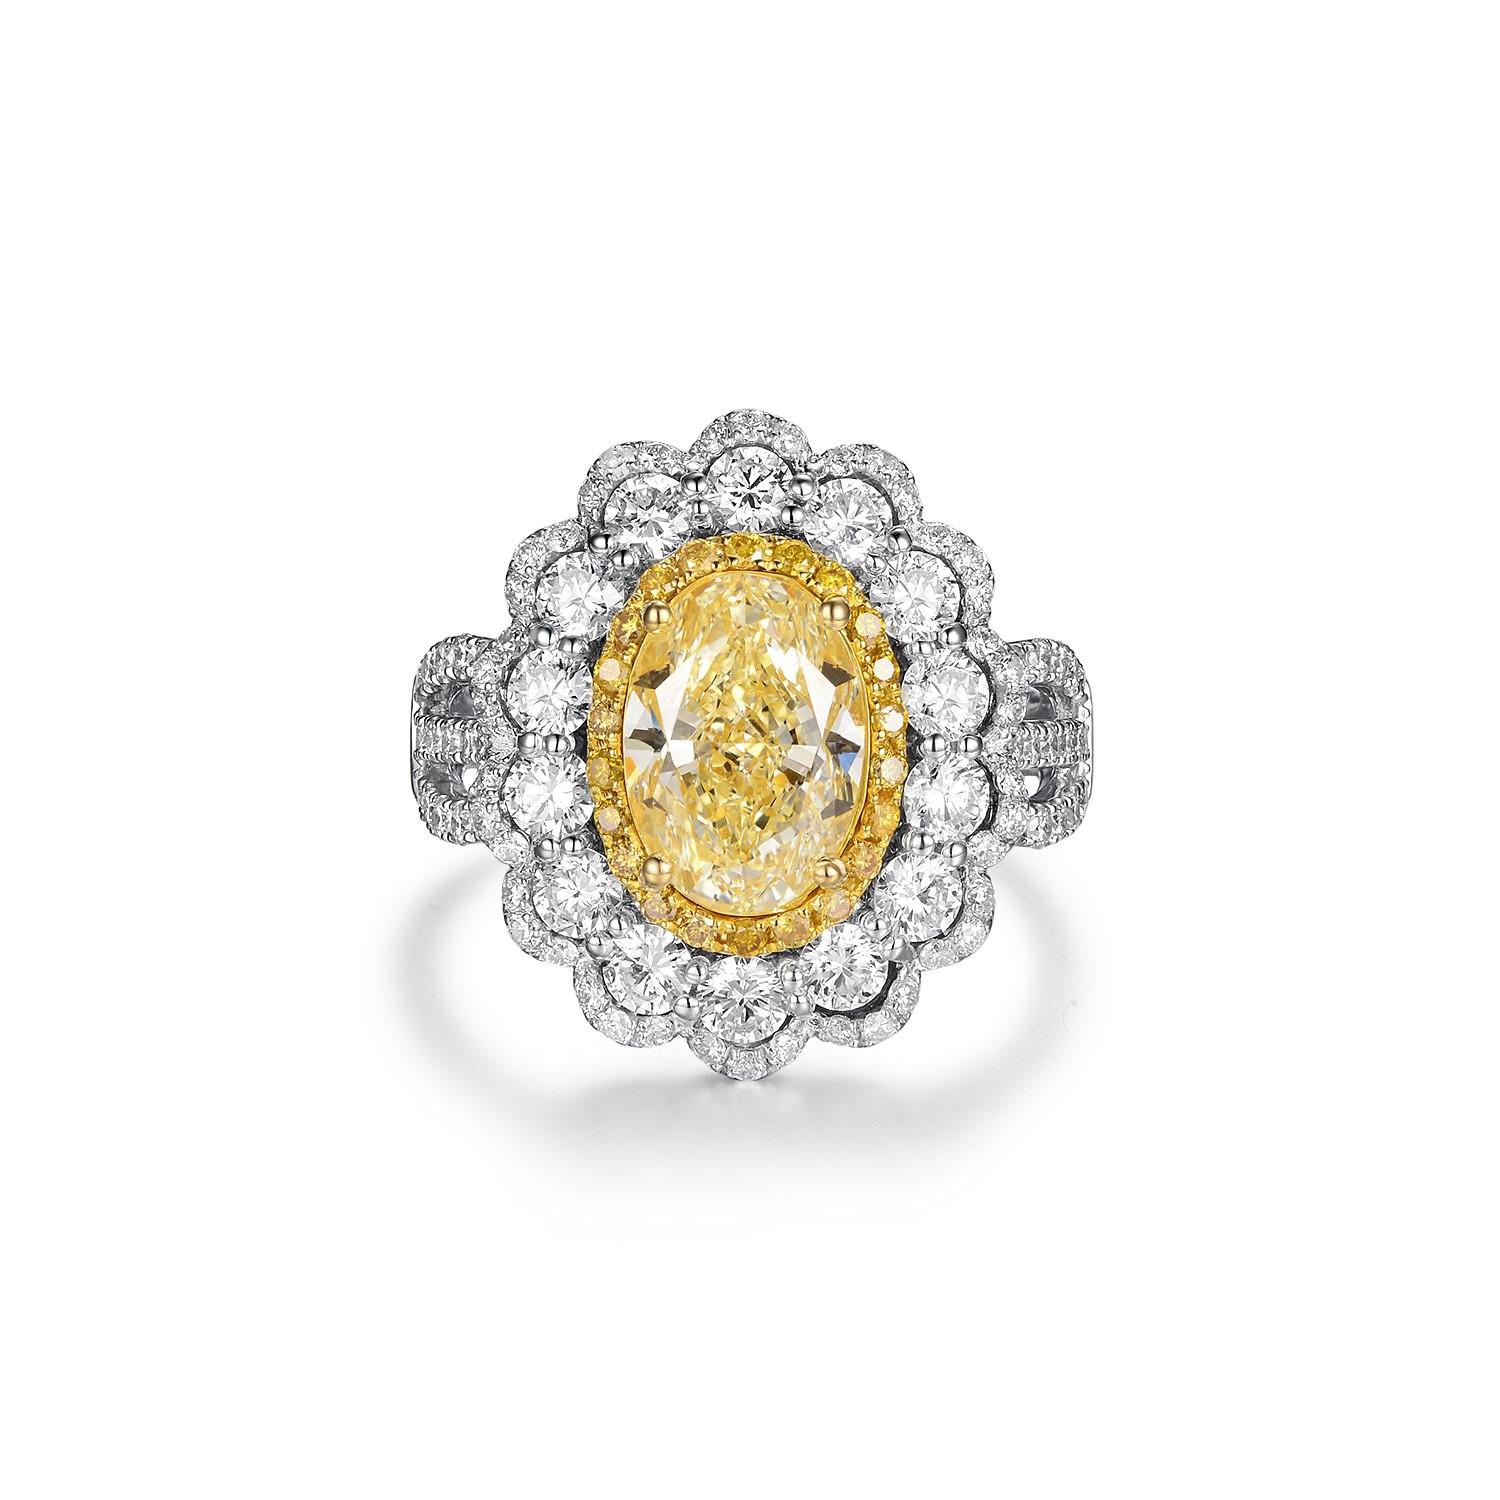 This exquisite ring features a central yellow diamond, IGI certified and weighing 2.29 carats with an N color grading, which exhibits a warm, sunlit hue. Set in 18 karat white gold, this resplendent gemstone is the star of a triple halo setting, a